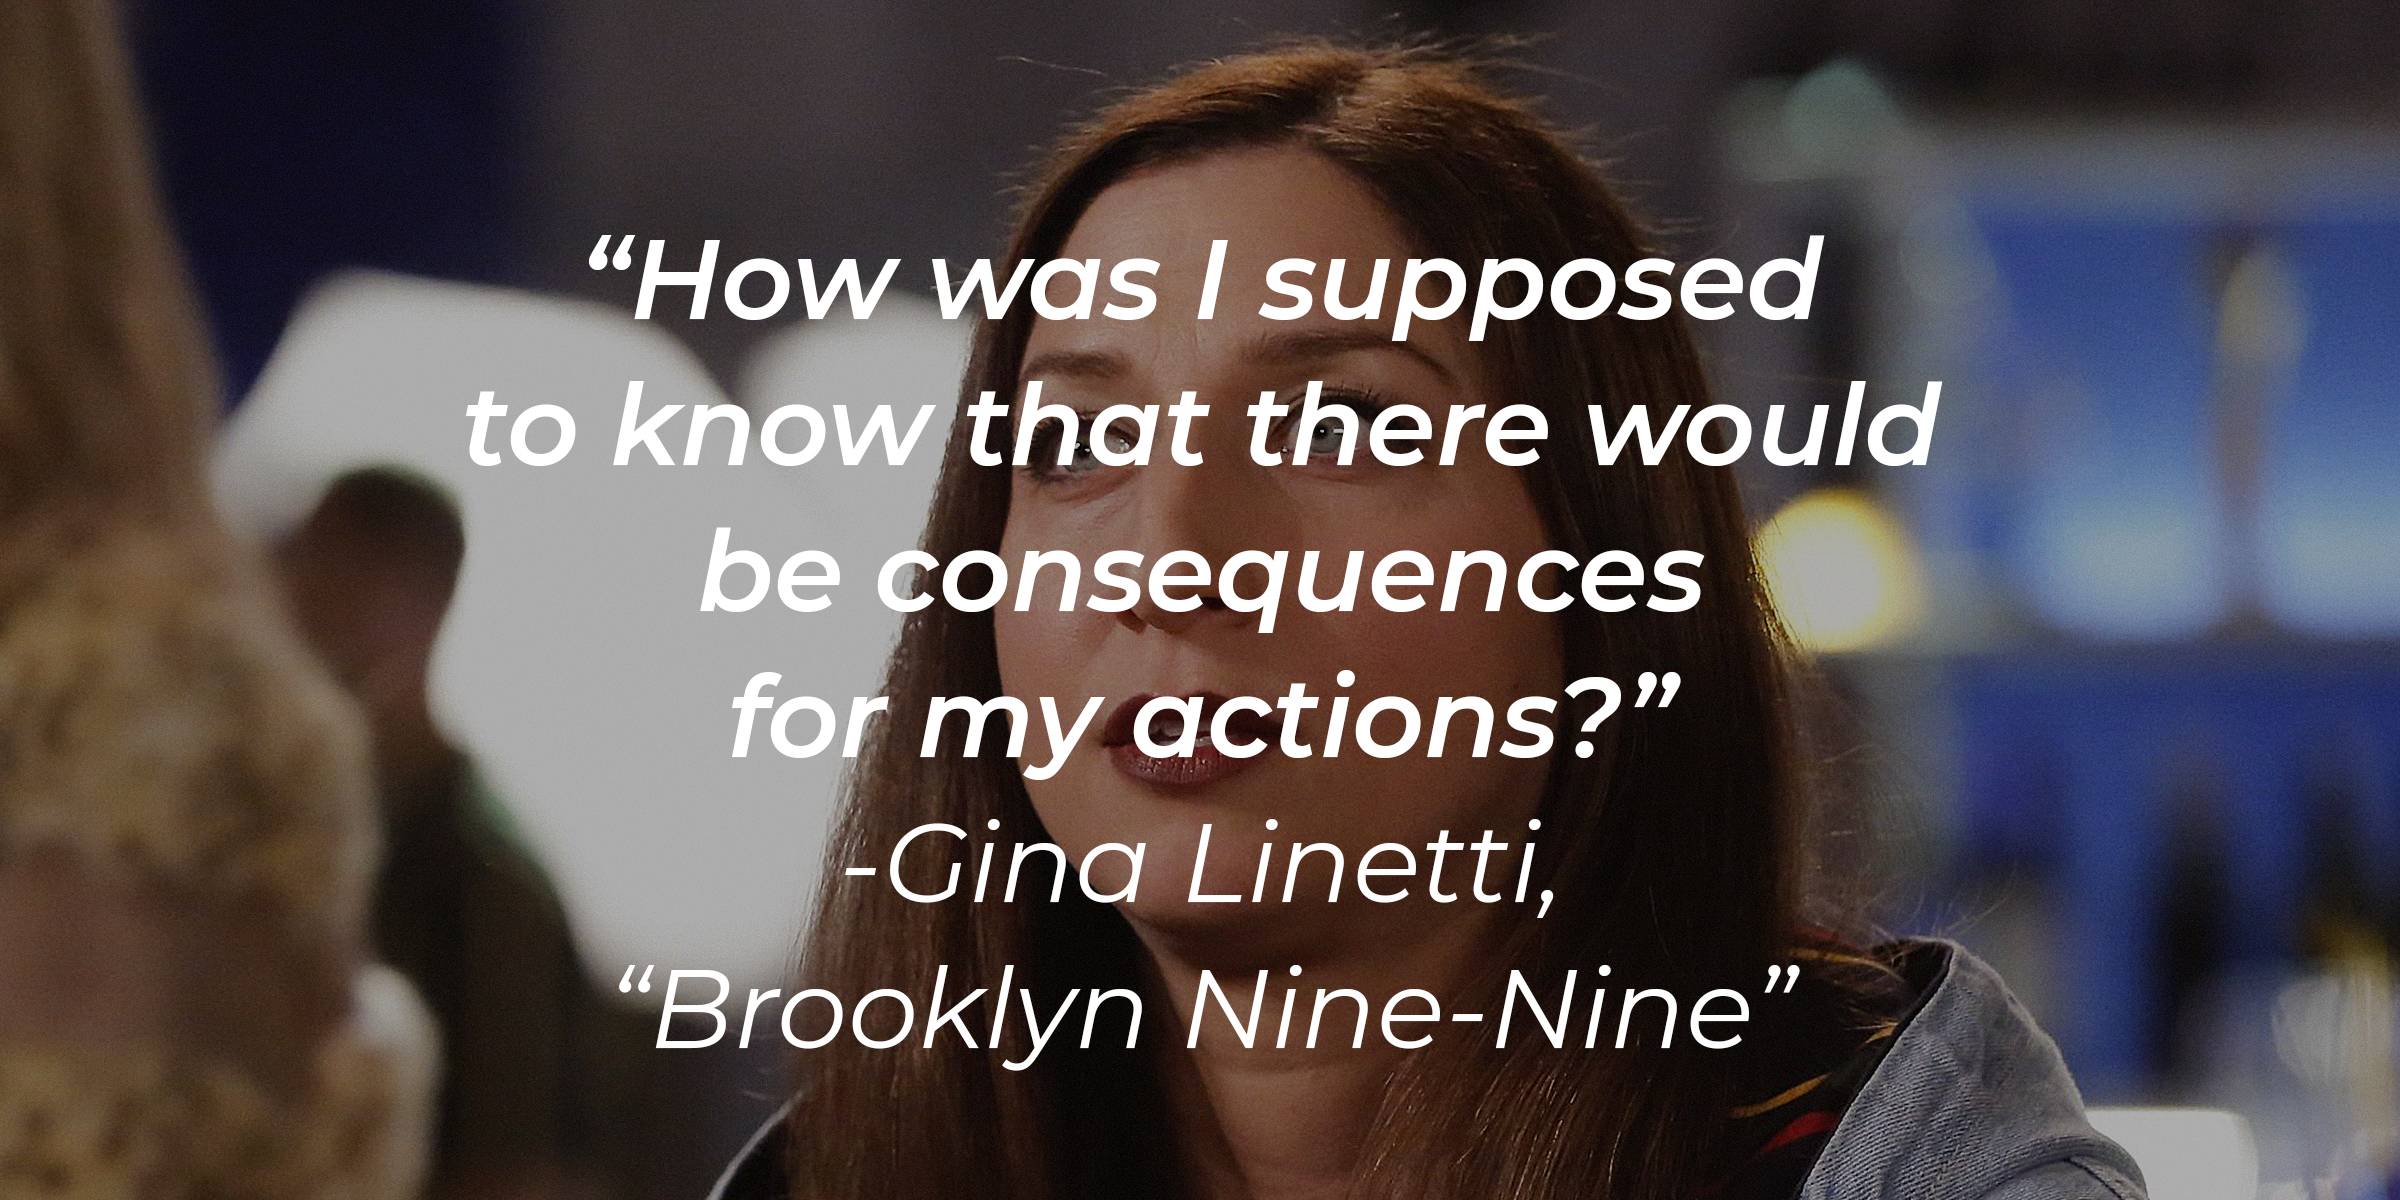 Gina Linetti with her quote: "How was I supposed to know that there would be consequences for my actions?" | Source: Facebook.com/BrooklynNineNine